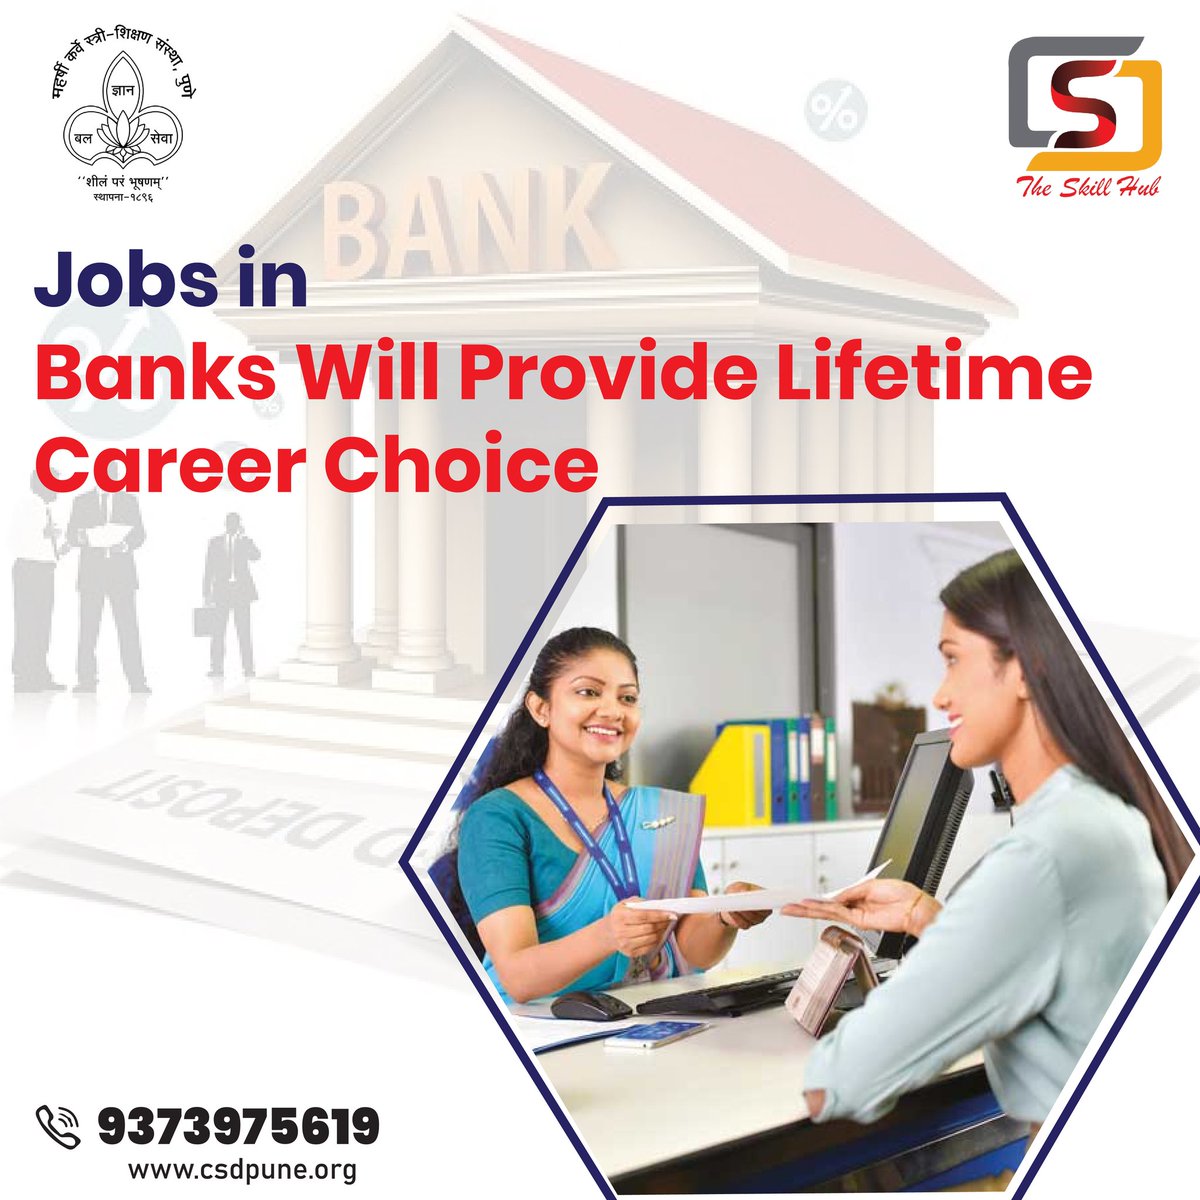 The best way to predict your future is to create it.
Create your future with us...
.
.
.
.
Apply now 
Follow Us:  
Facebook: facebook.com/mkssscsdpune
Instagram: instagram.com/csdpuneofficia…
#DemoSession  #institute  #bankjobs #BankJobs2022 #bankjobsindia #Bankingcareer #bankingcareer